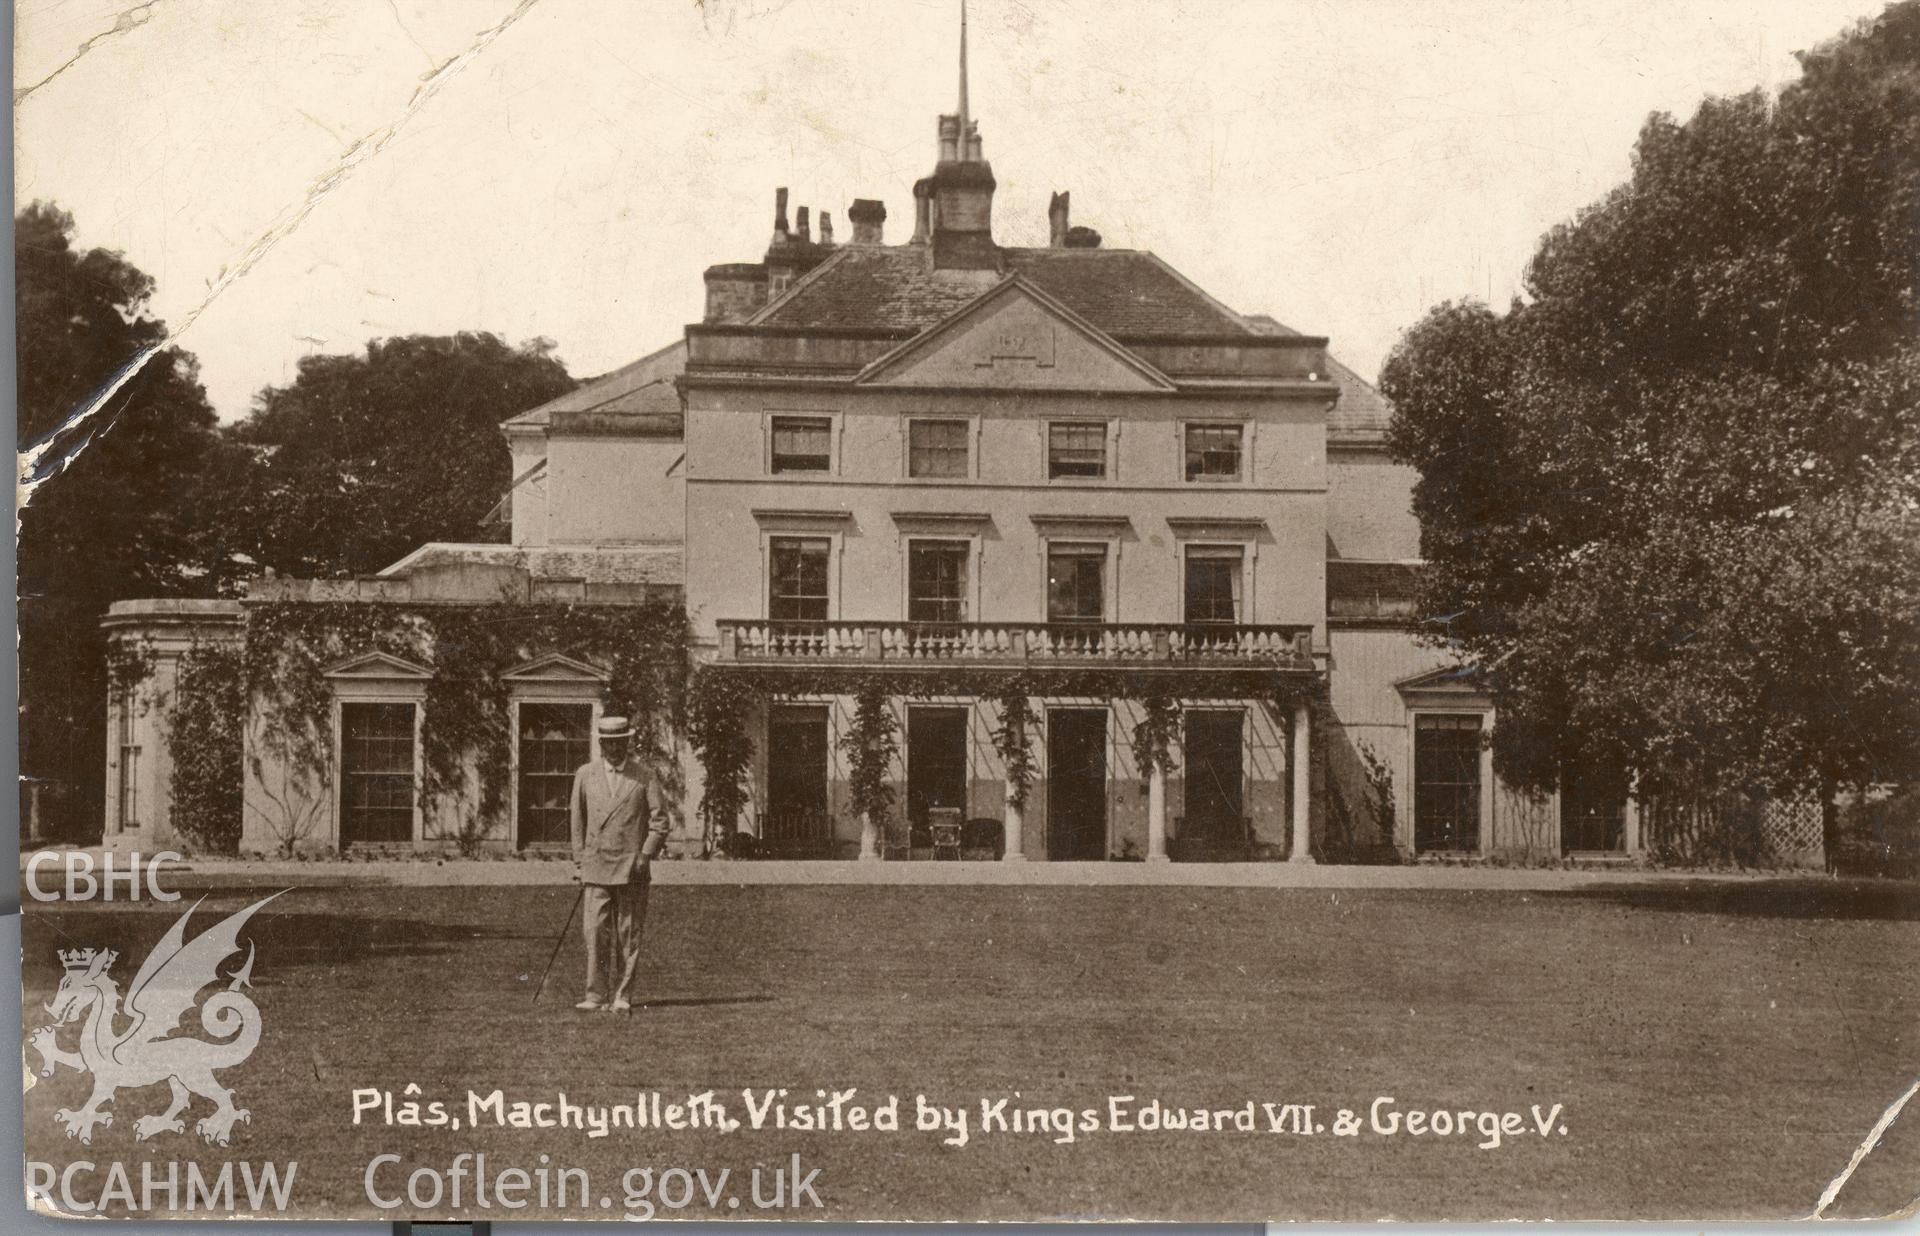 Digitised postcard image of the Plas, Machynlleth, with figure. Produced by Parks and Gardens Data Services, from an original item in the Peter Davis Collection at Parks and Gardens UK. We hold only web-resolution images of this collection, suitable for viewing on screen and for research purposes only. We do not hold the original images, or publication quality scans.